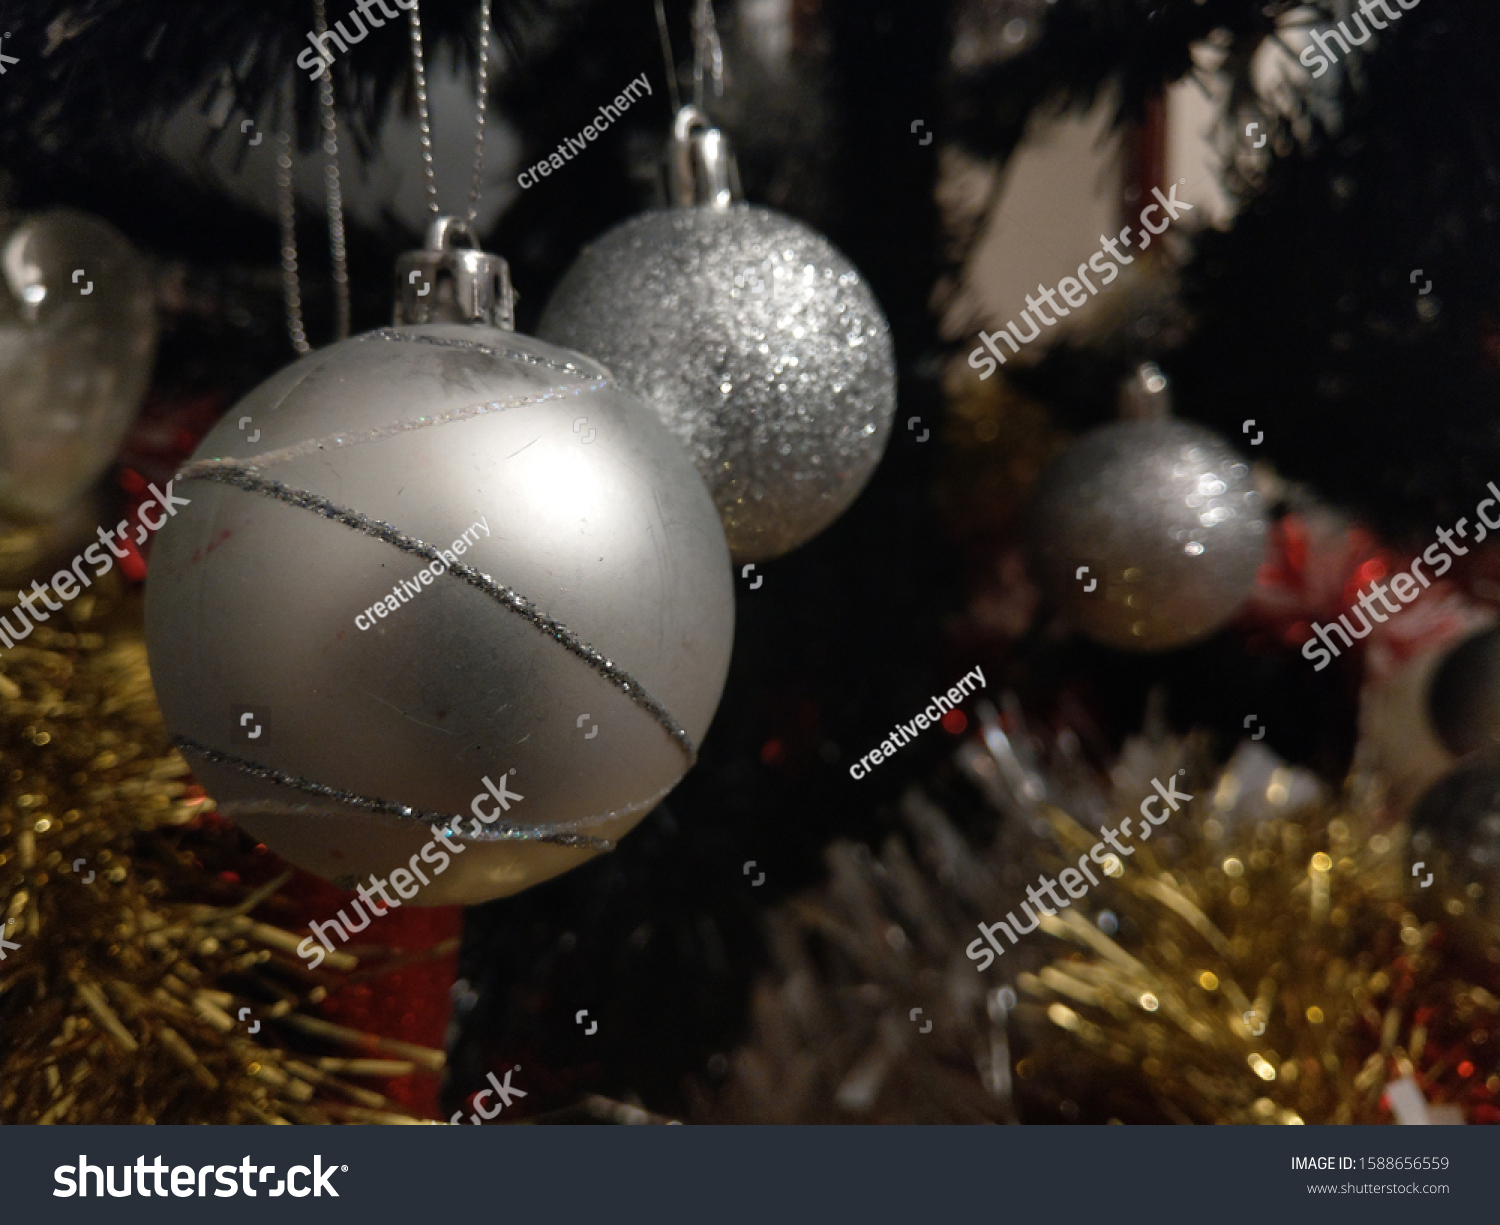 silver bauble infront of other baubles hanging on a tree with gold and red tinsel in view #1588656559